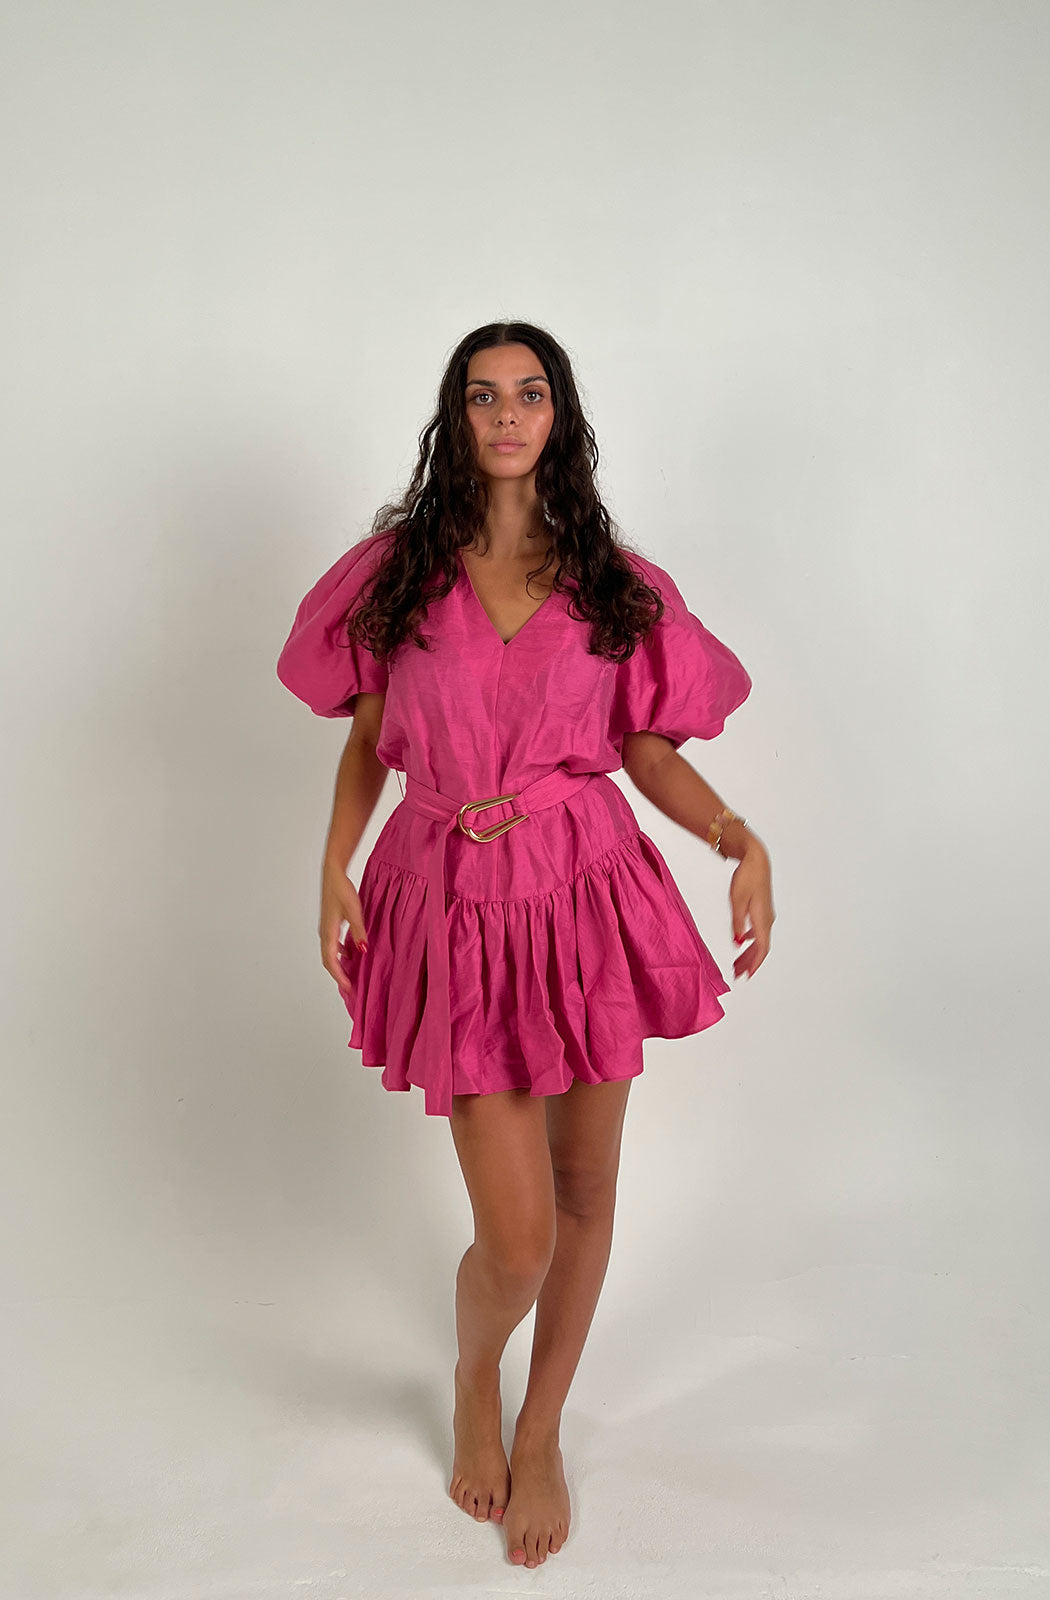 the Wheatland Dress in Flamingo is an elevated look. Crafted from a lush linen blend fabrication, this silhouette features accentuated sleeves, v-neckline, frill toward the hem and elevated d-ring belt with luxe gold hardware.